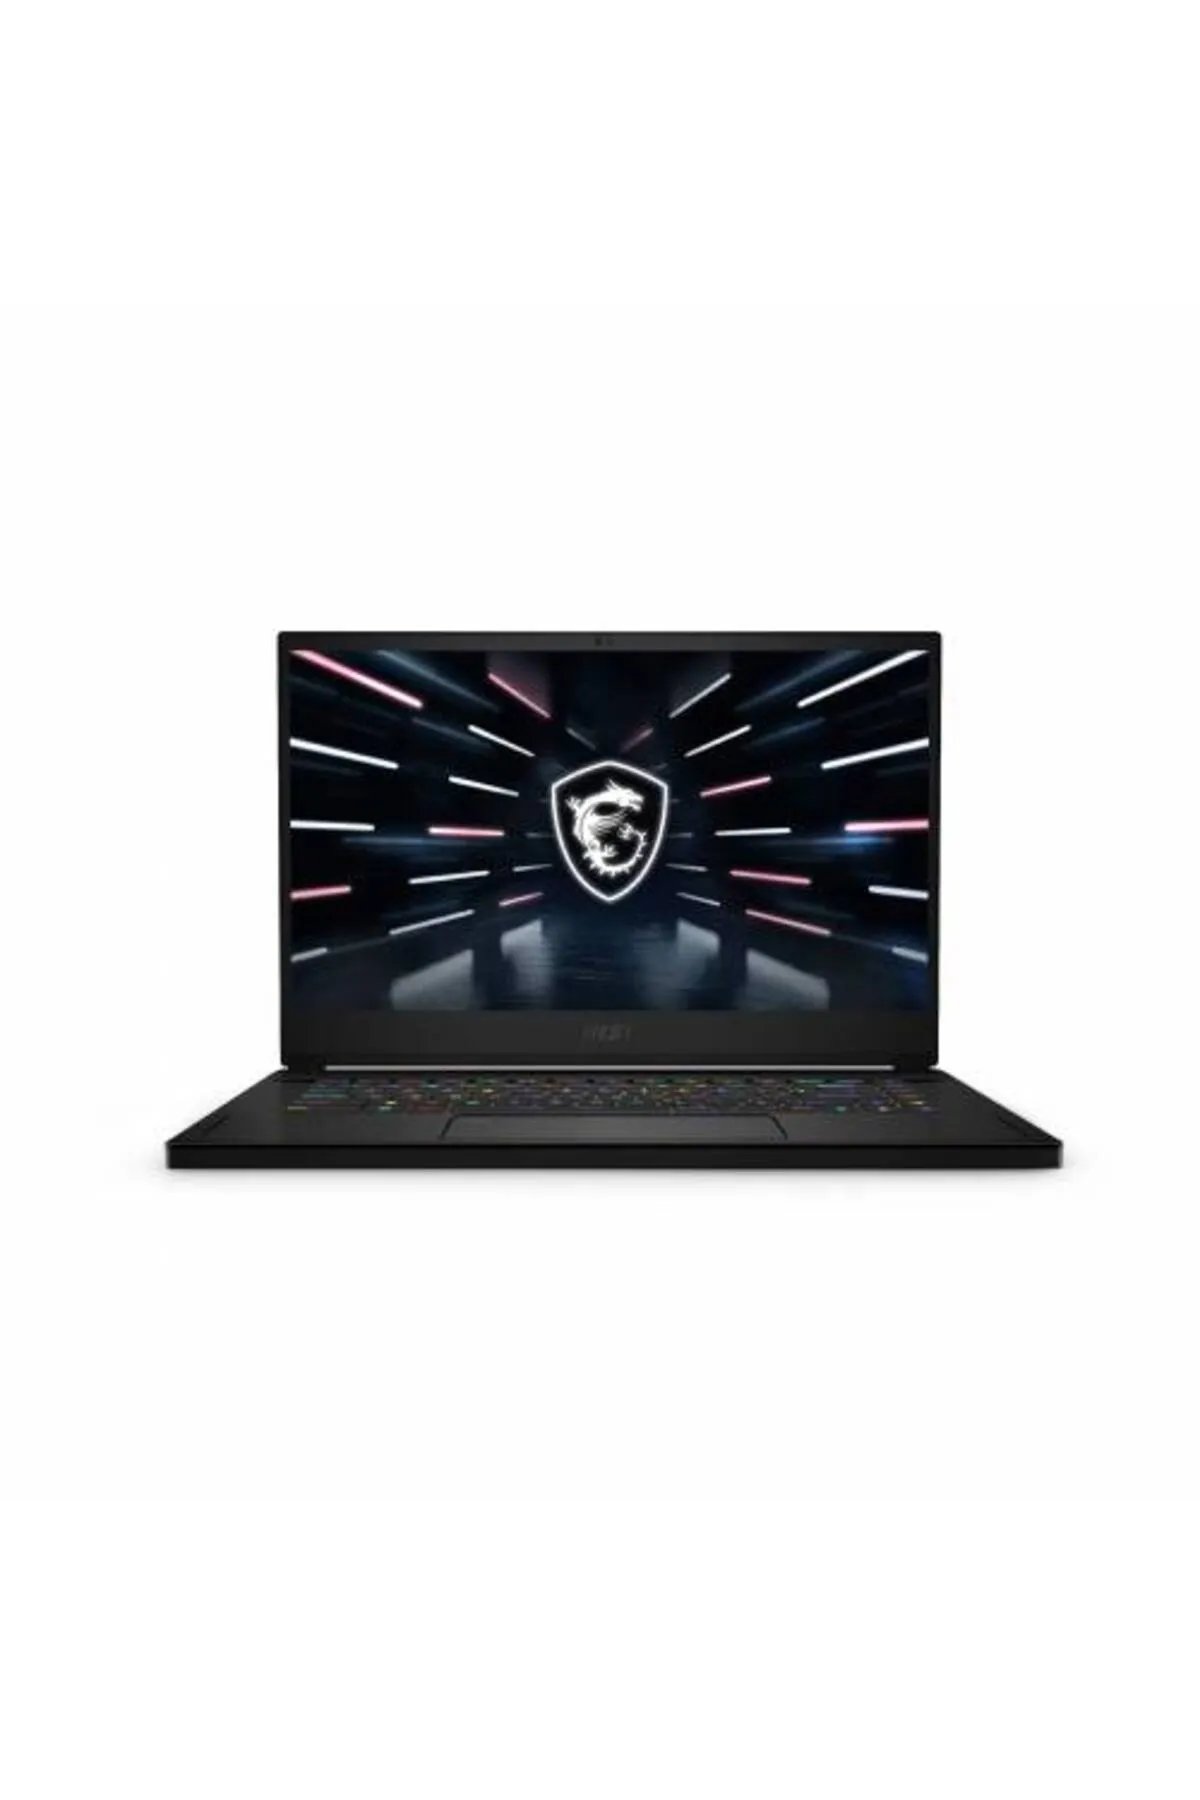 MSI Nb Stealth Gs66 12uhs-049tr